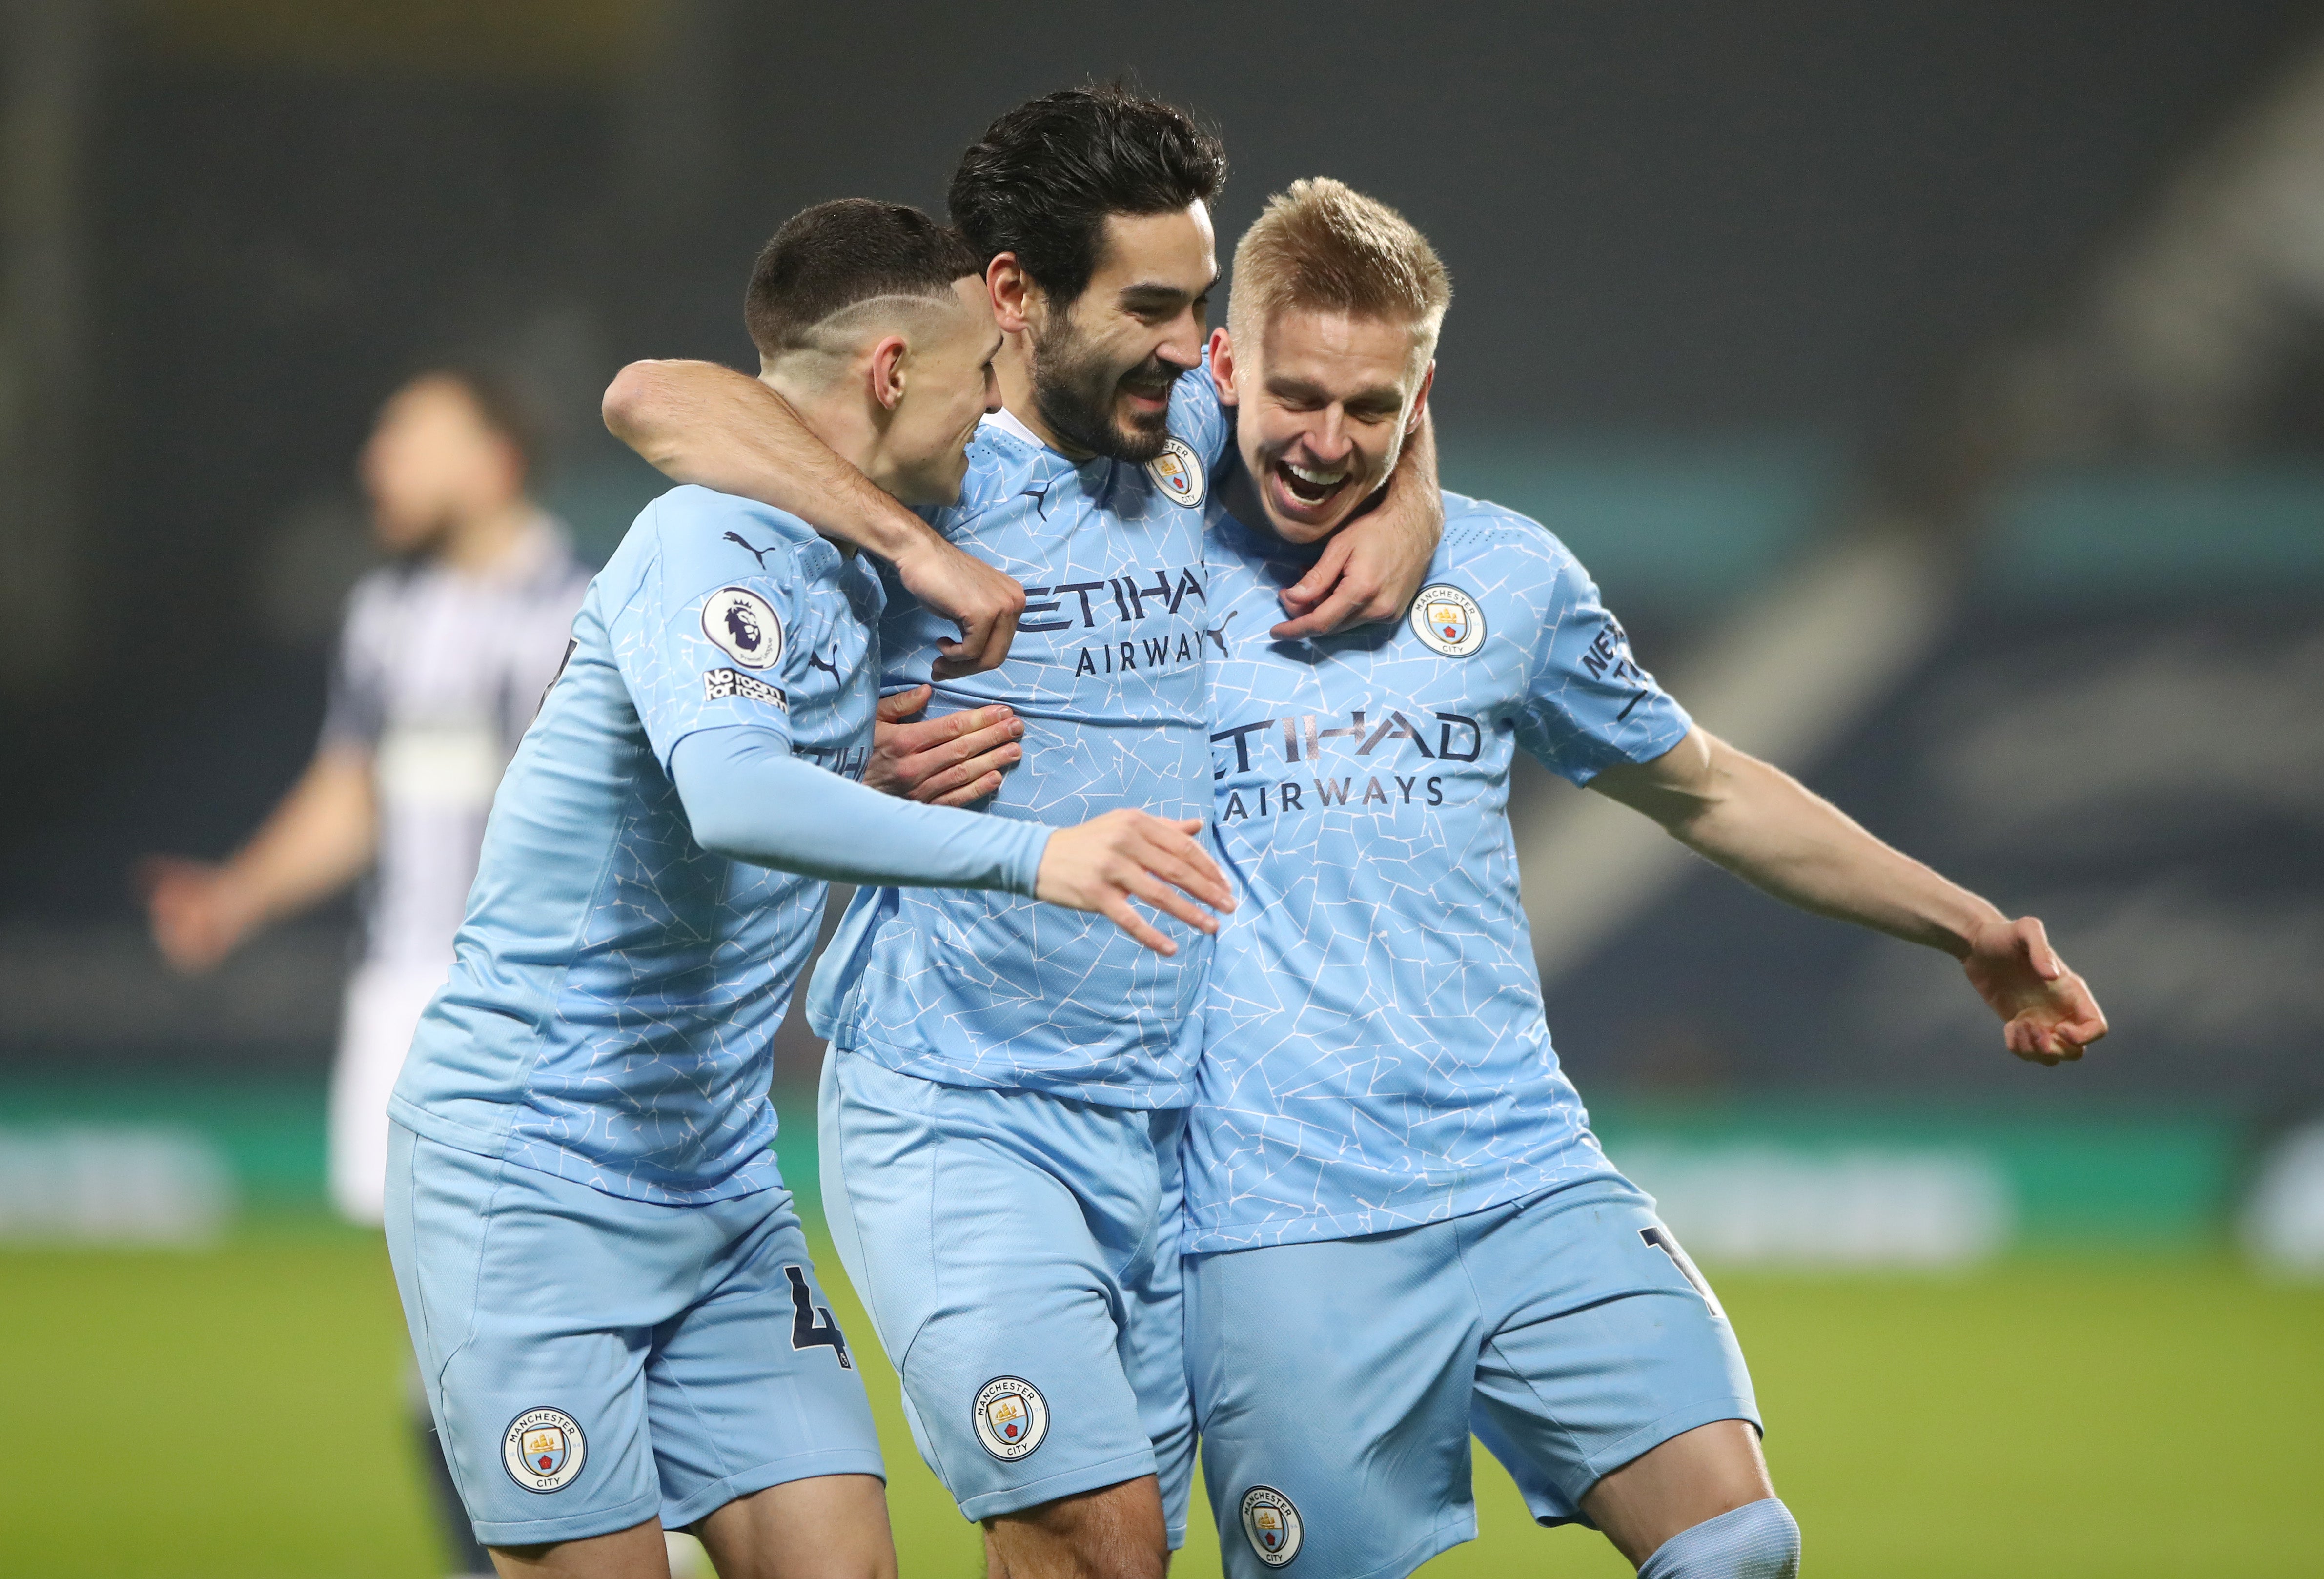 Manchester City have been crowned Premier League champions